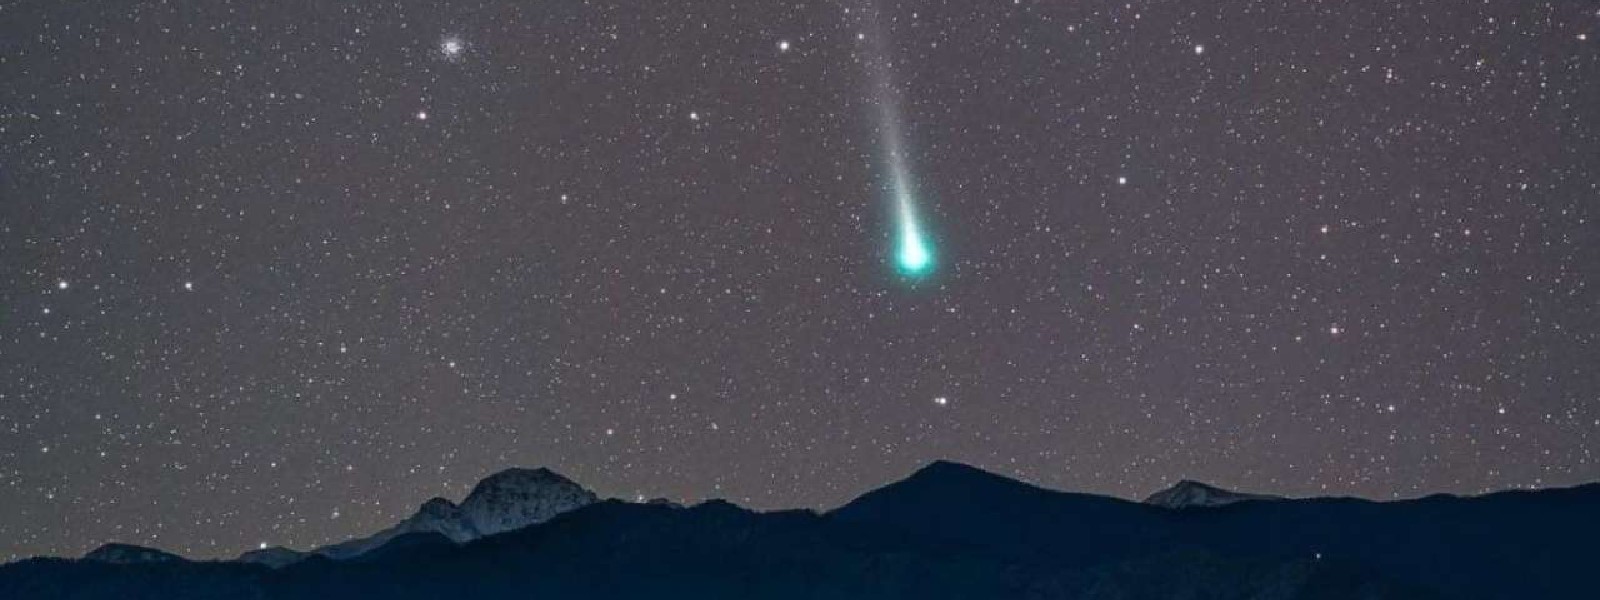 Comet Leonard visible to earth in December